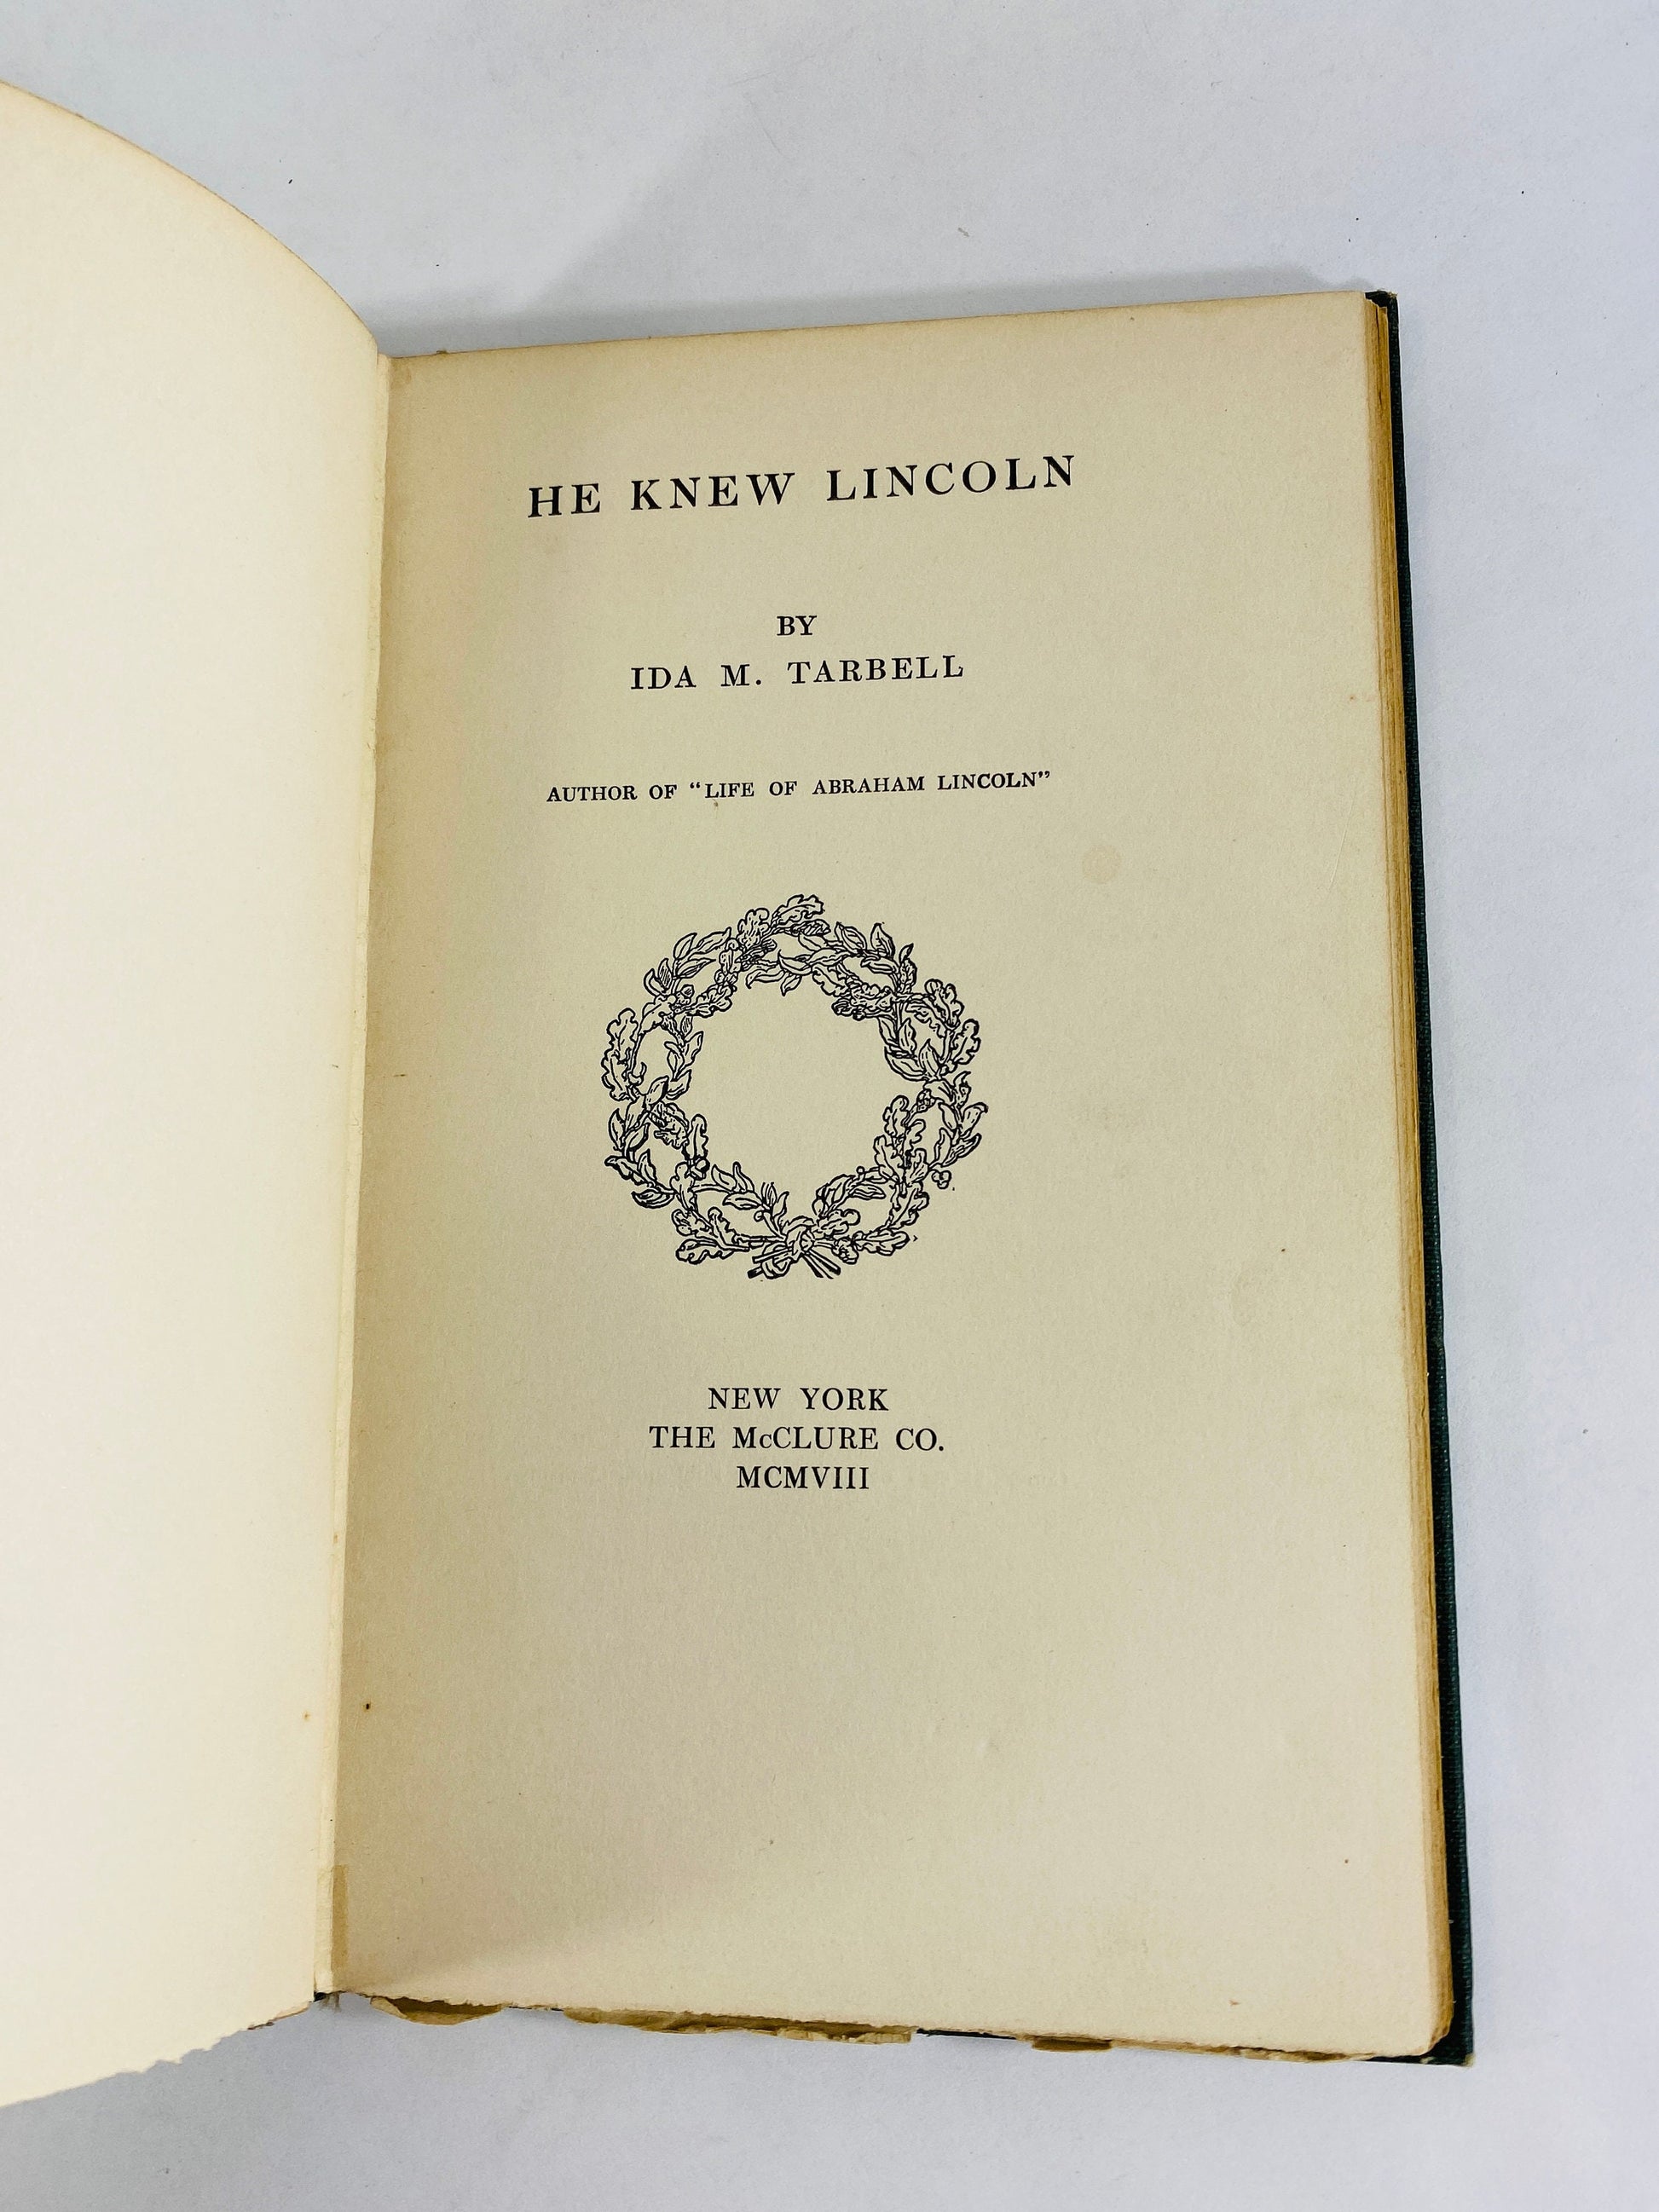 1908 He Knew Lincoln FIRST Edition vintage book by Ida M Tarbell antique bookshelf decor.